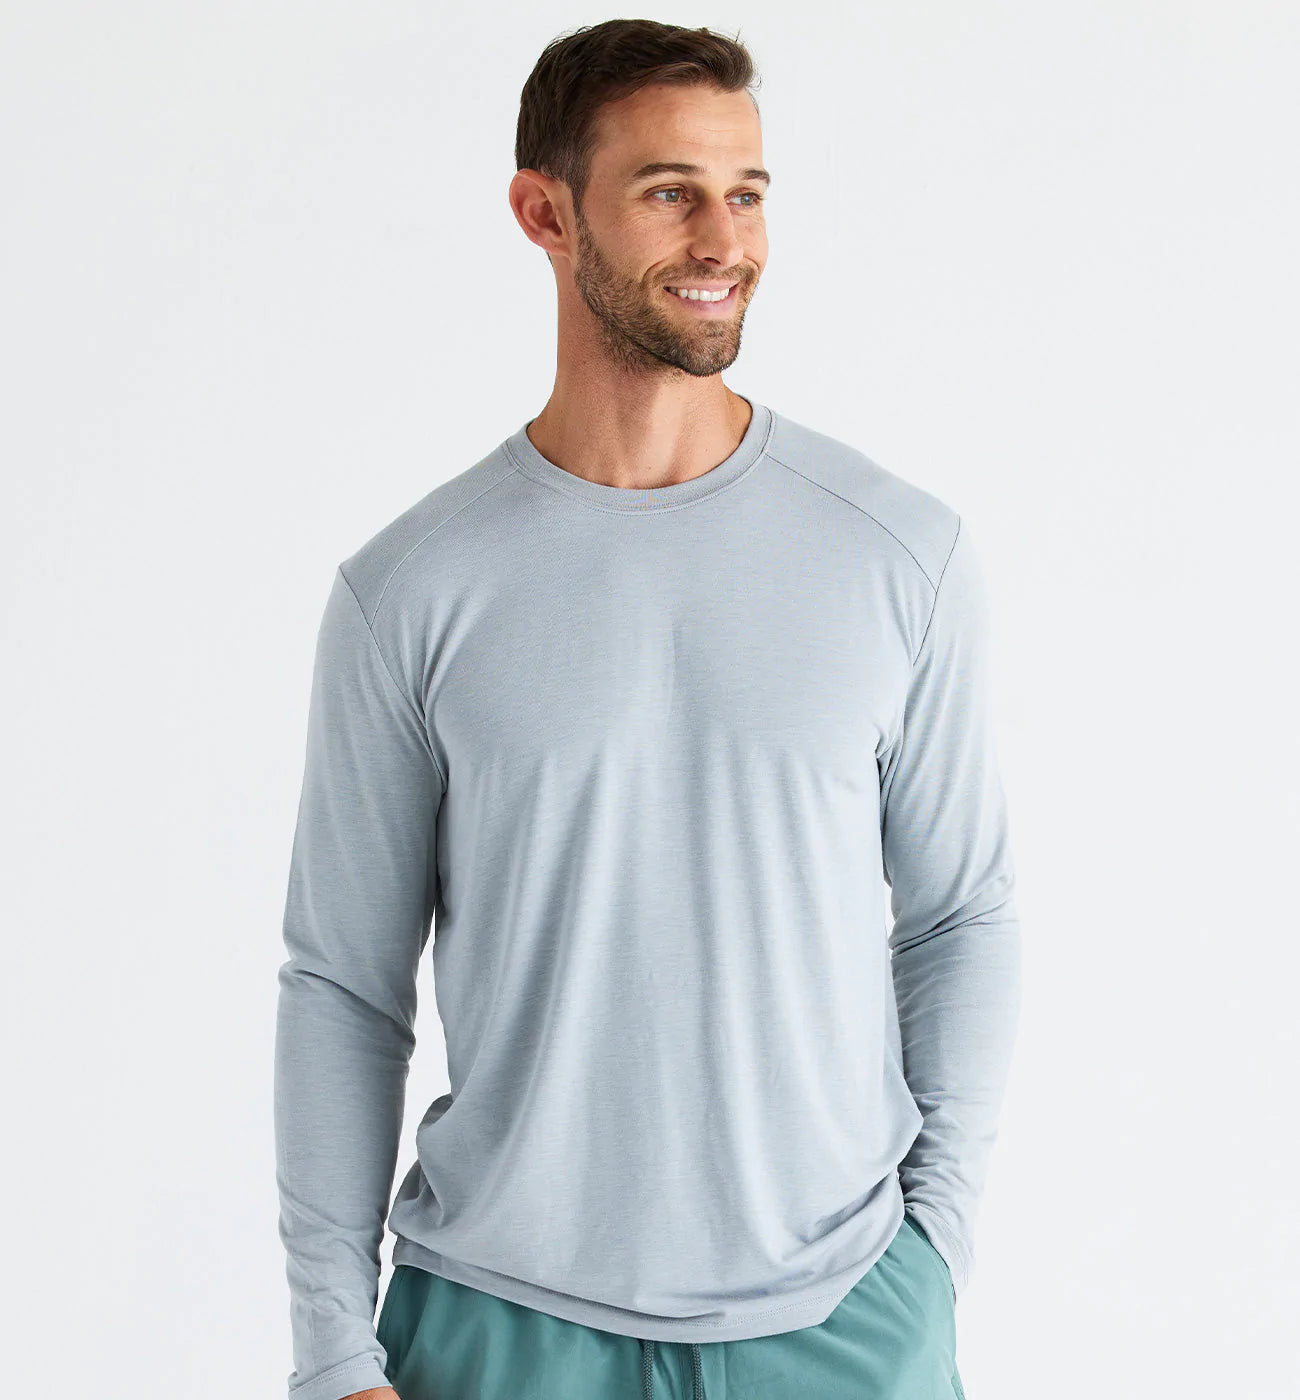 The Softest Long Sleeve Bamboo Top